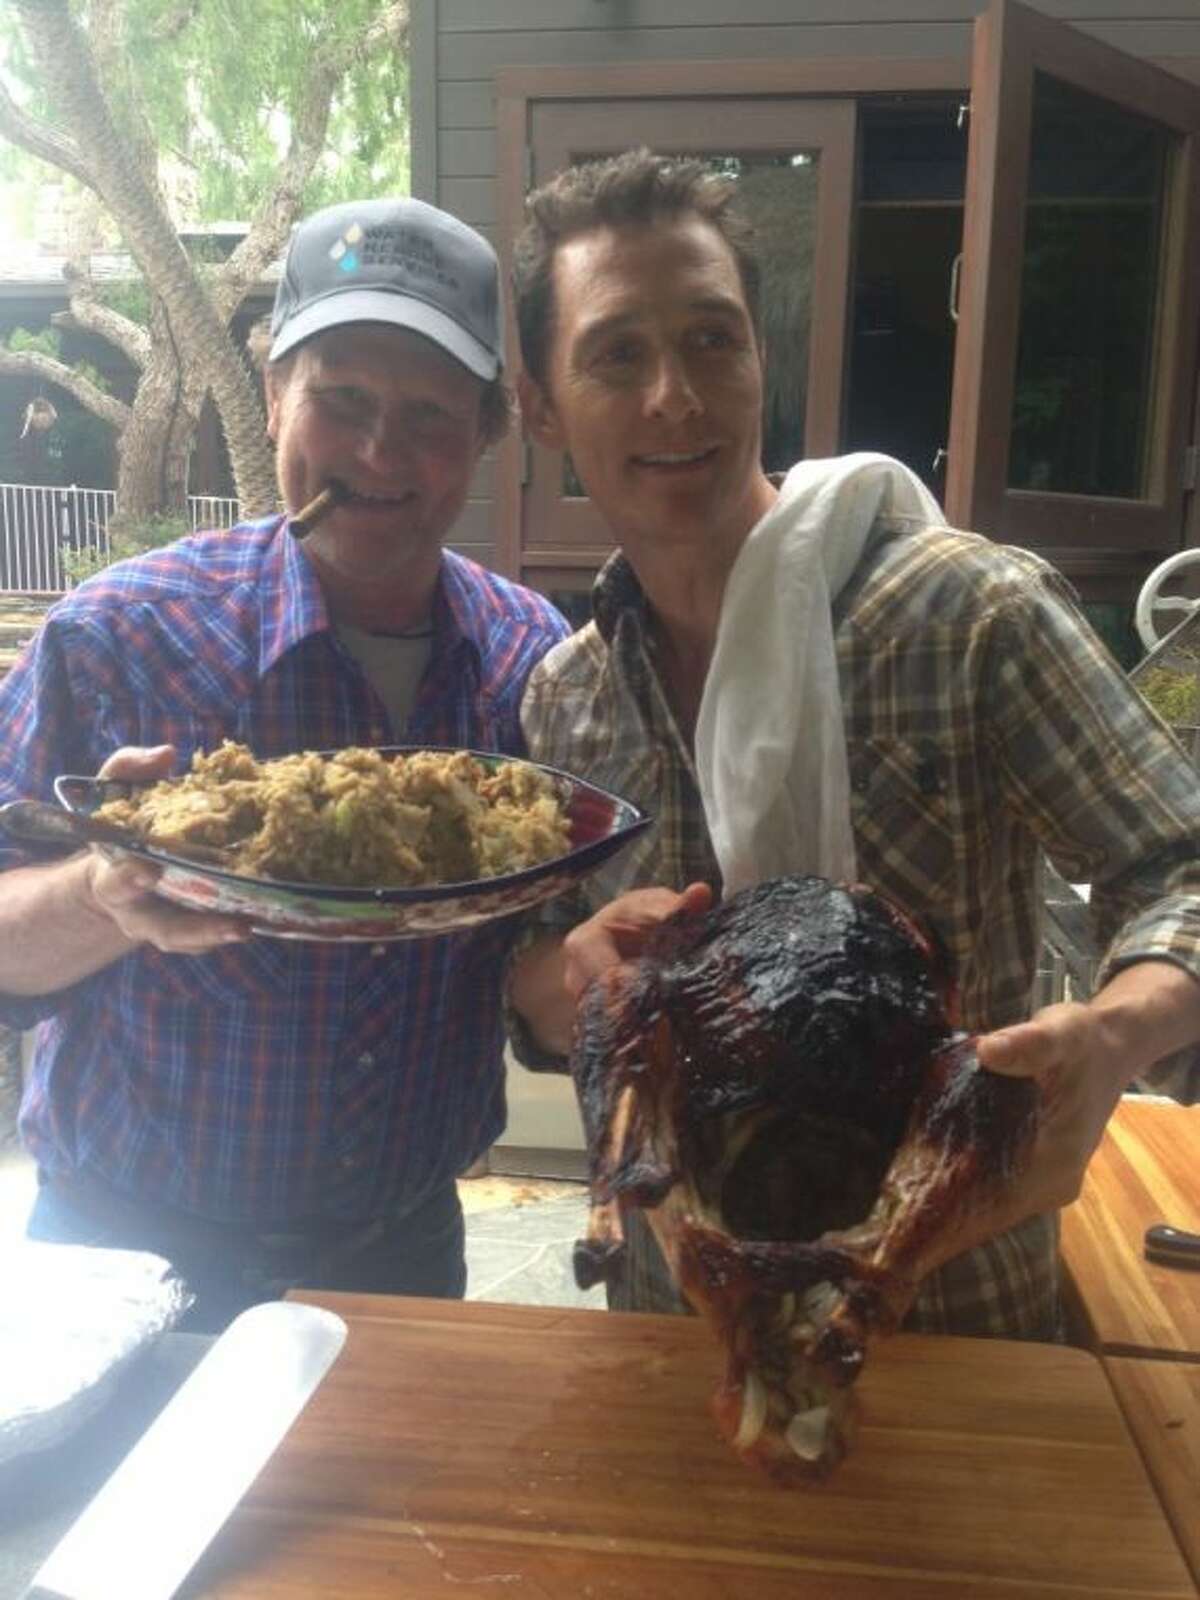 Matthew McConaughey and his brother, Rooster, at Thanksgiving together last year. Photo provided by Rooster McConaughey.